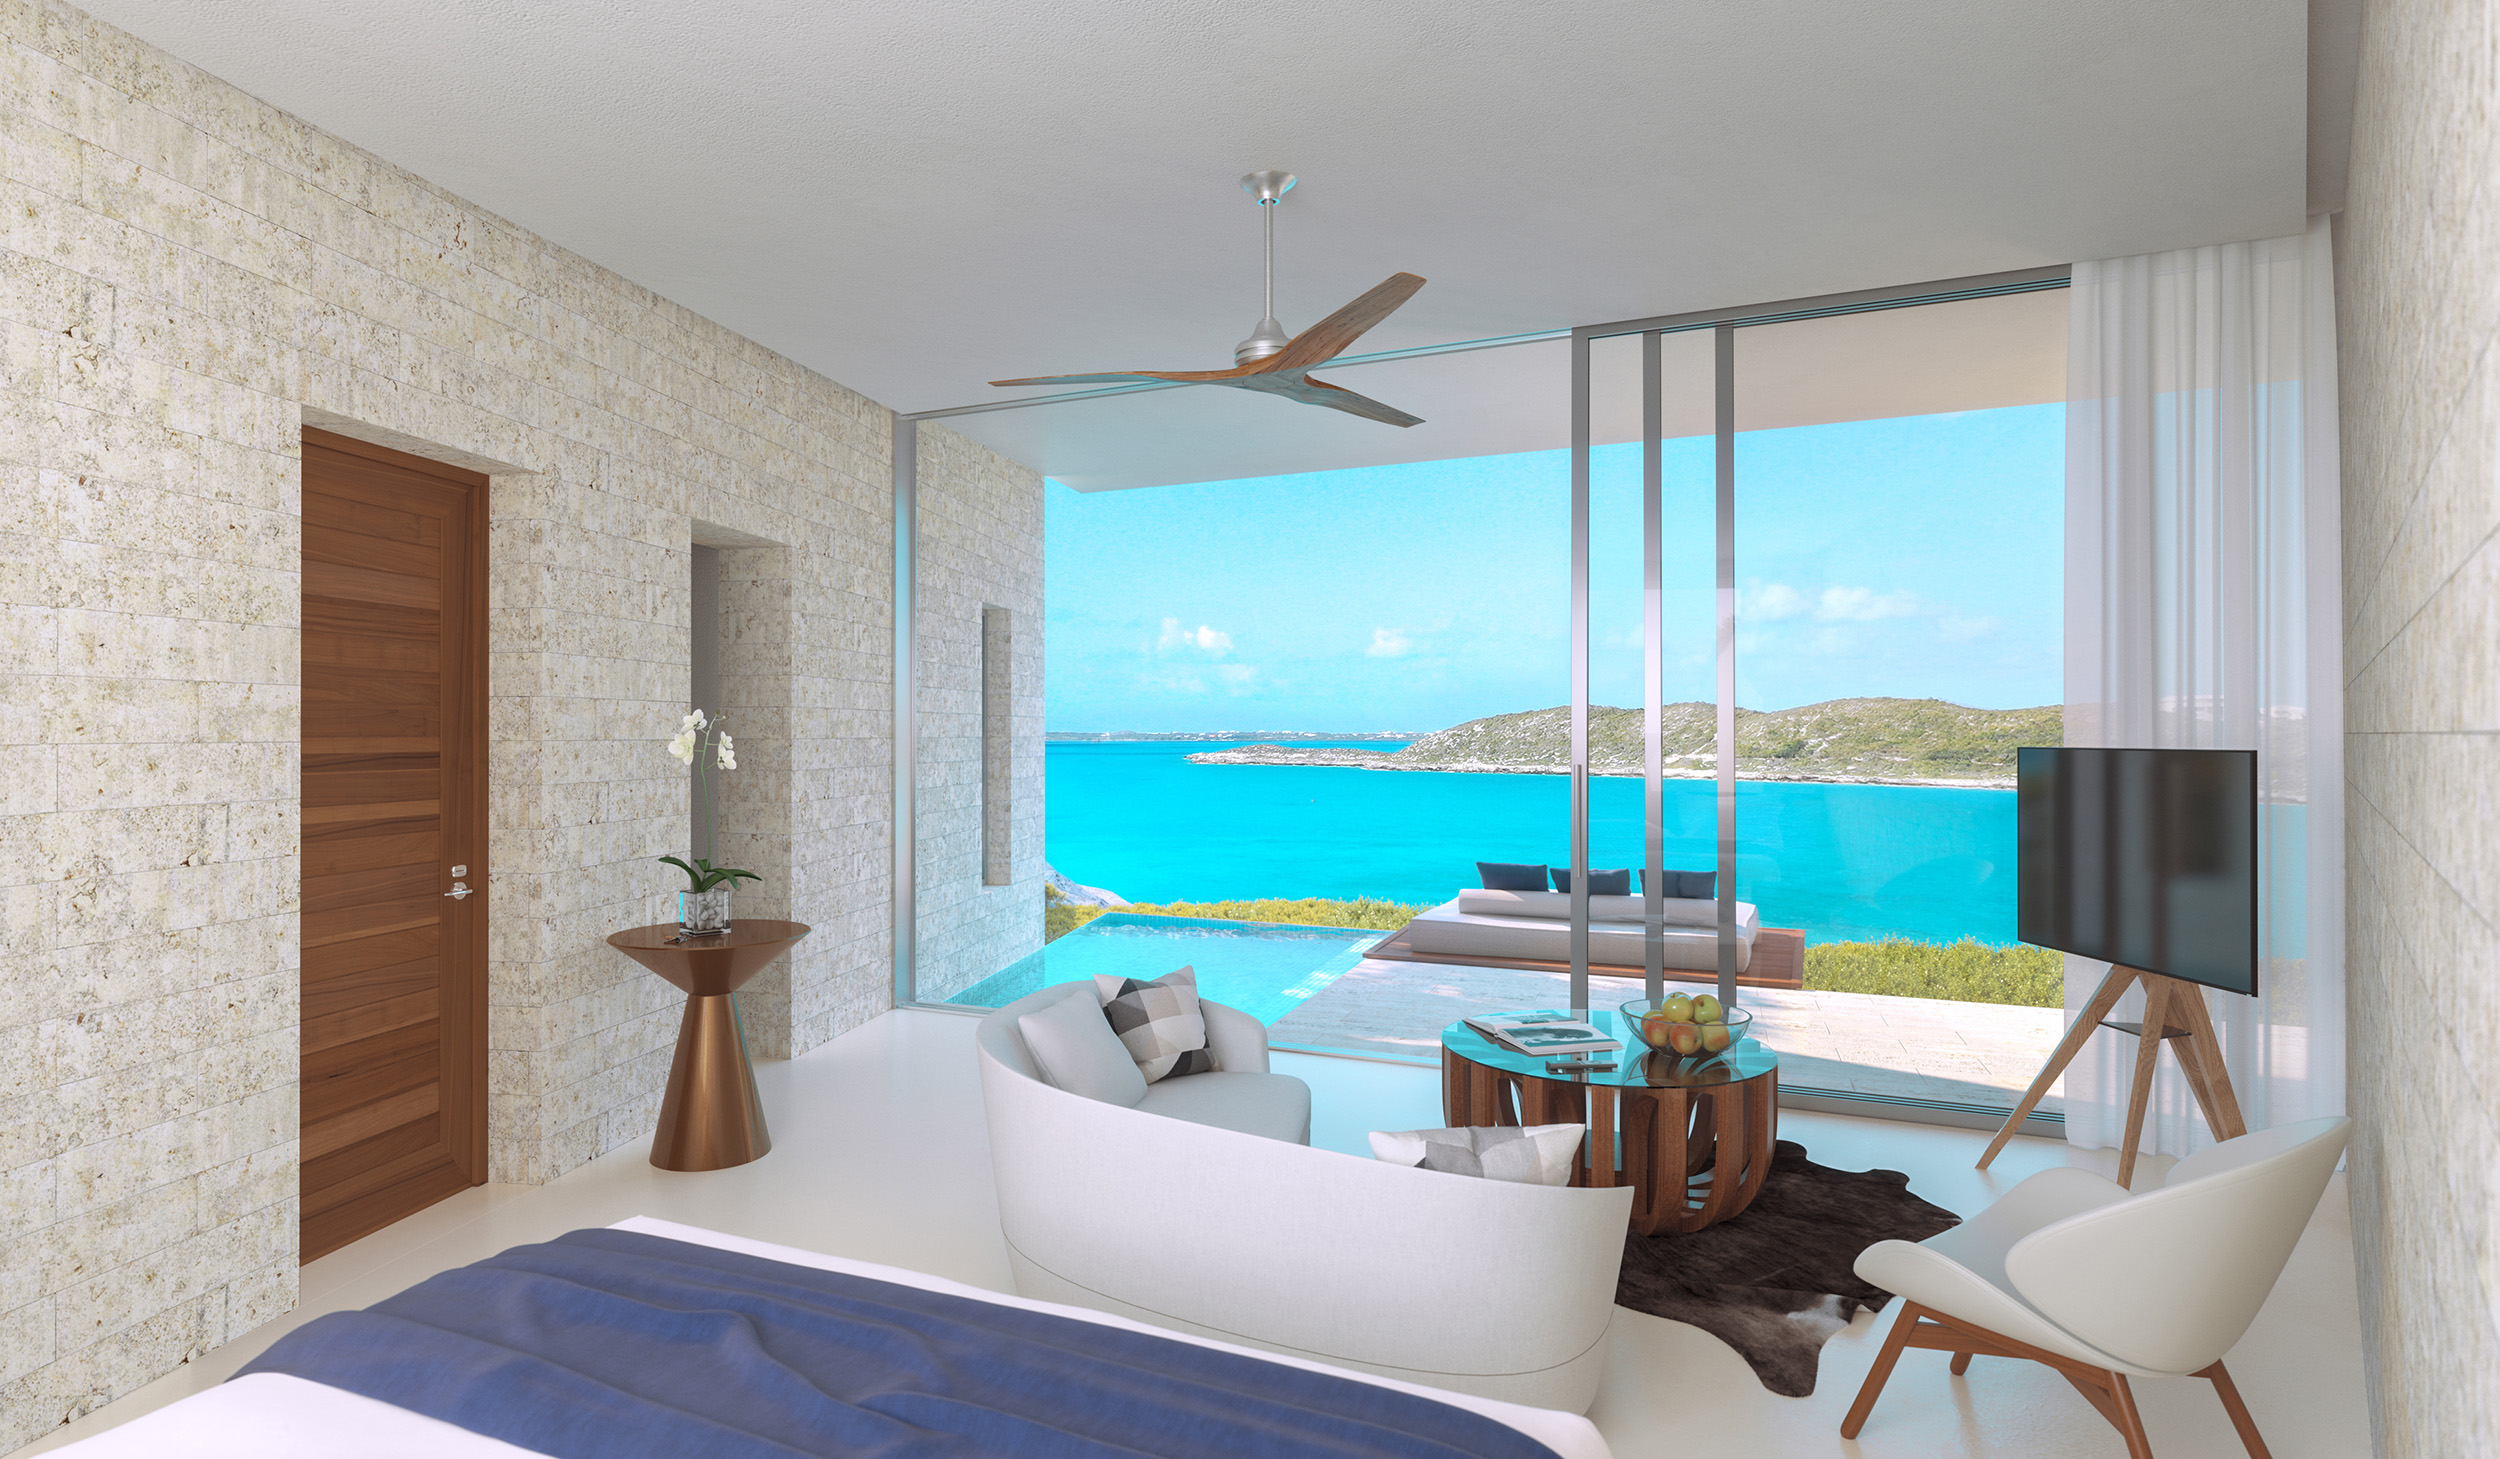 Wymara Villas - computer rendered view from the phase 2 guest houses